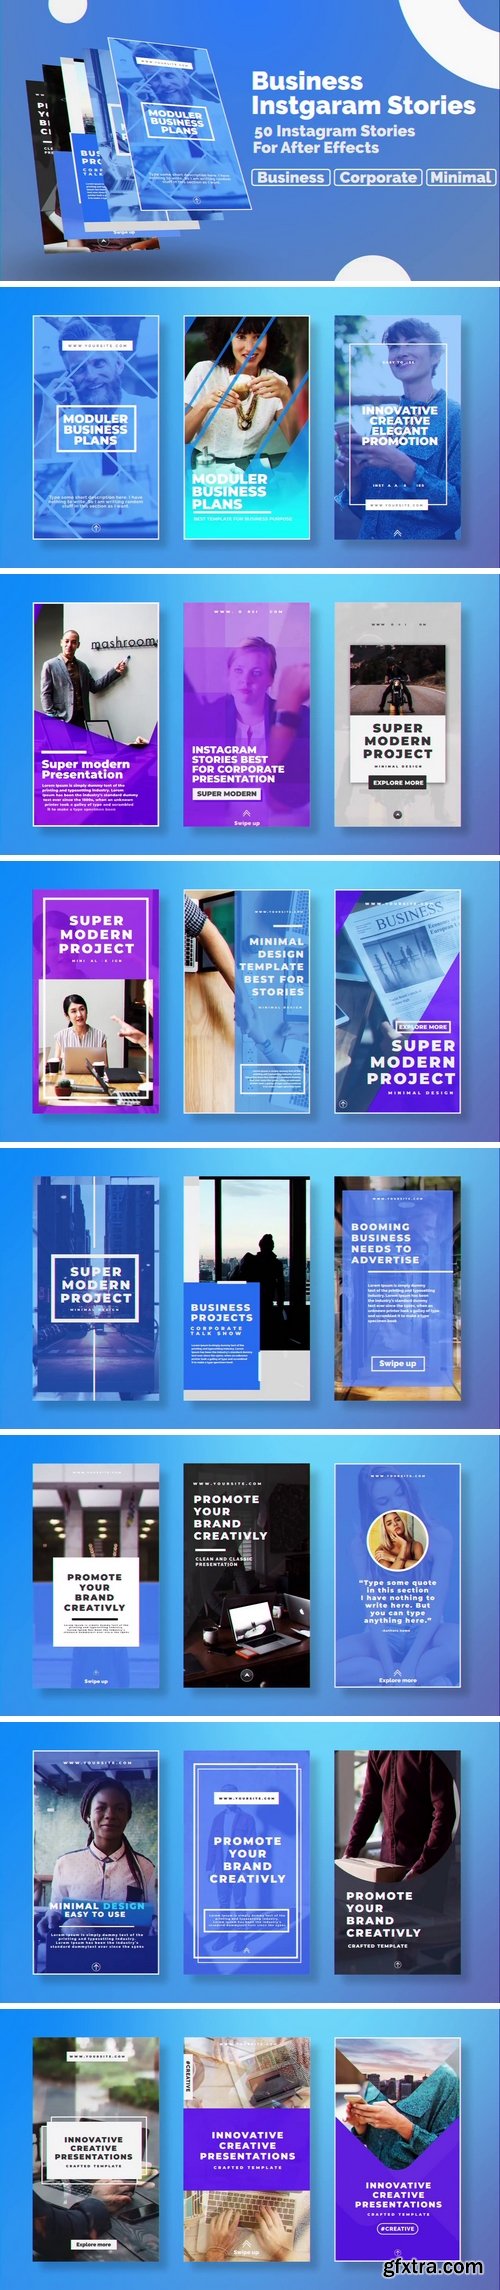 MA - Business Instagram Stories After Effects Templates 151433